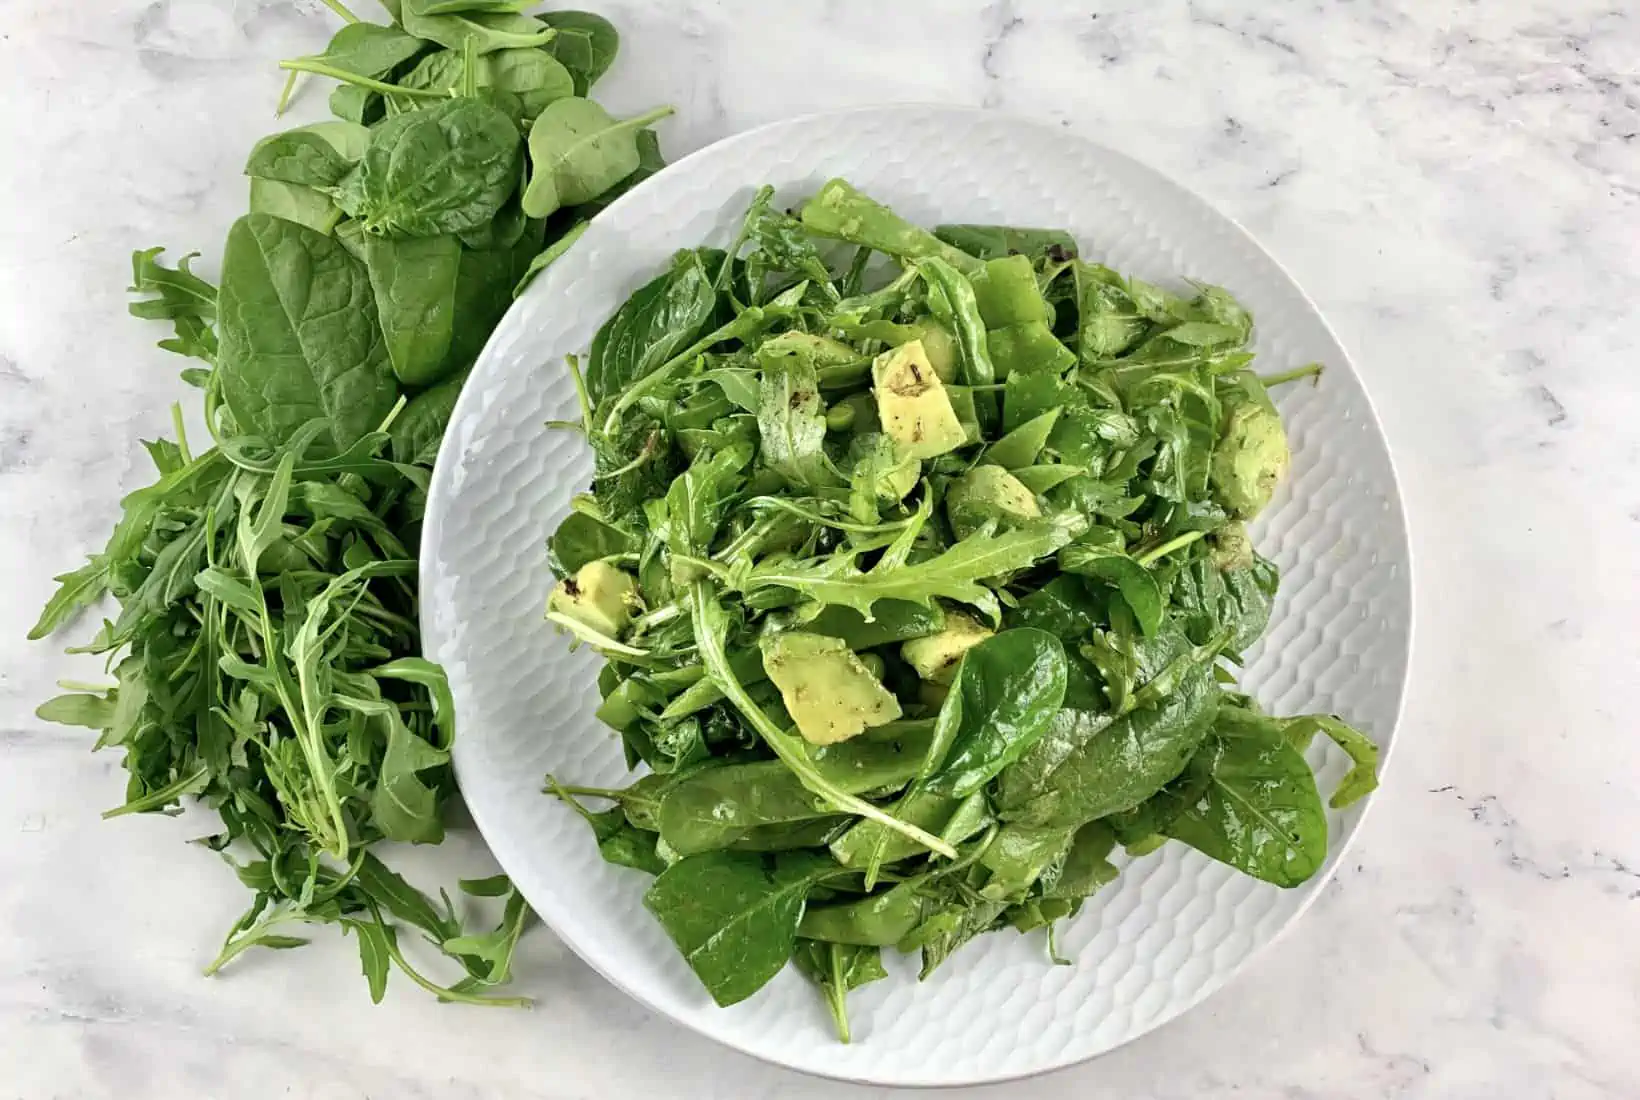 Spinach arugula salad on a white plate with greens scattered around.